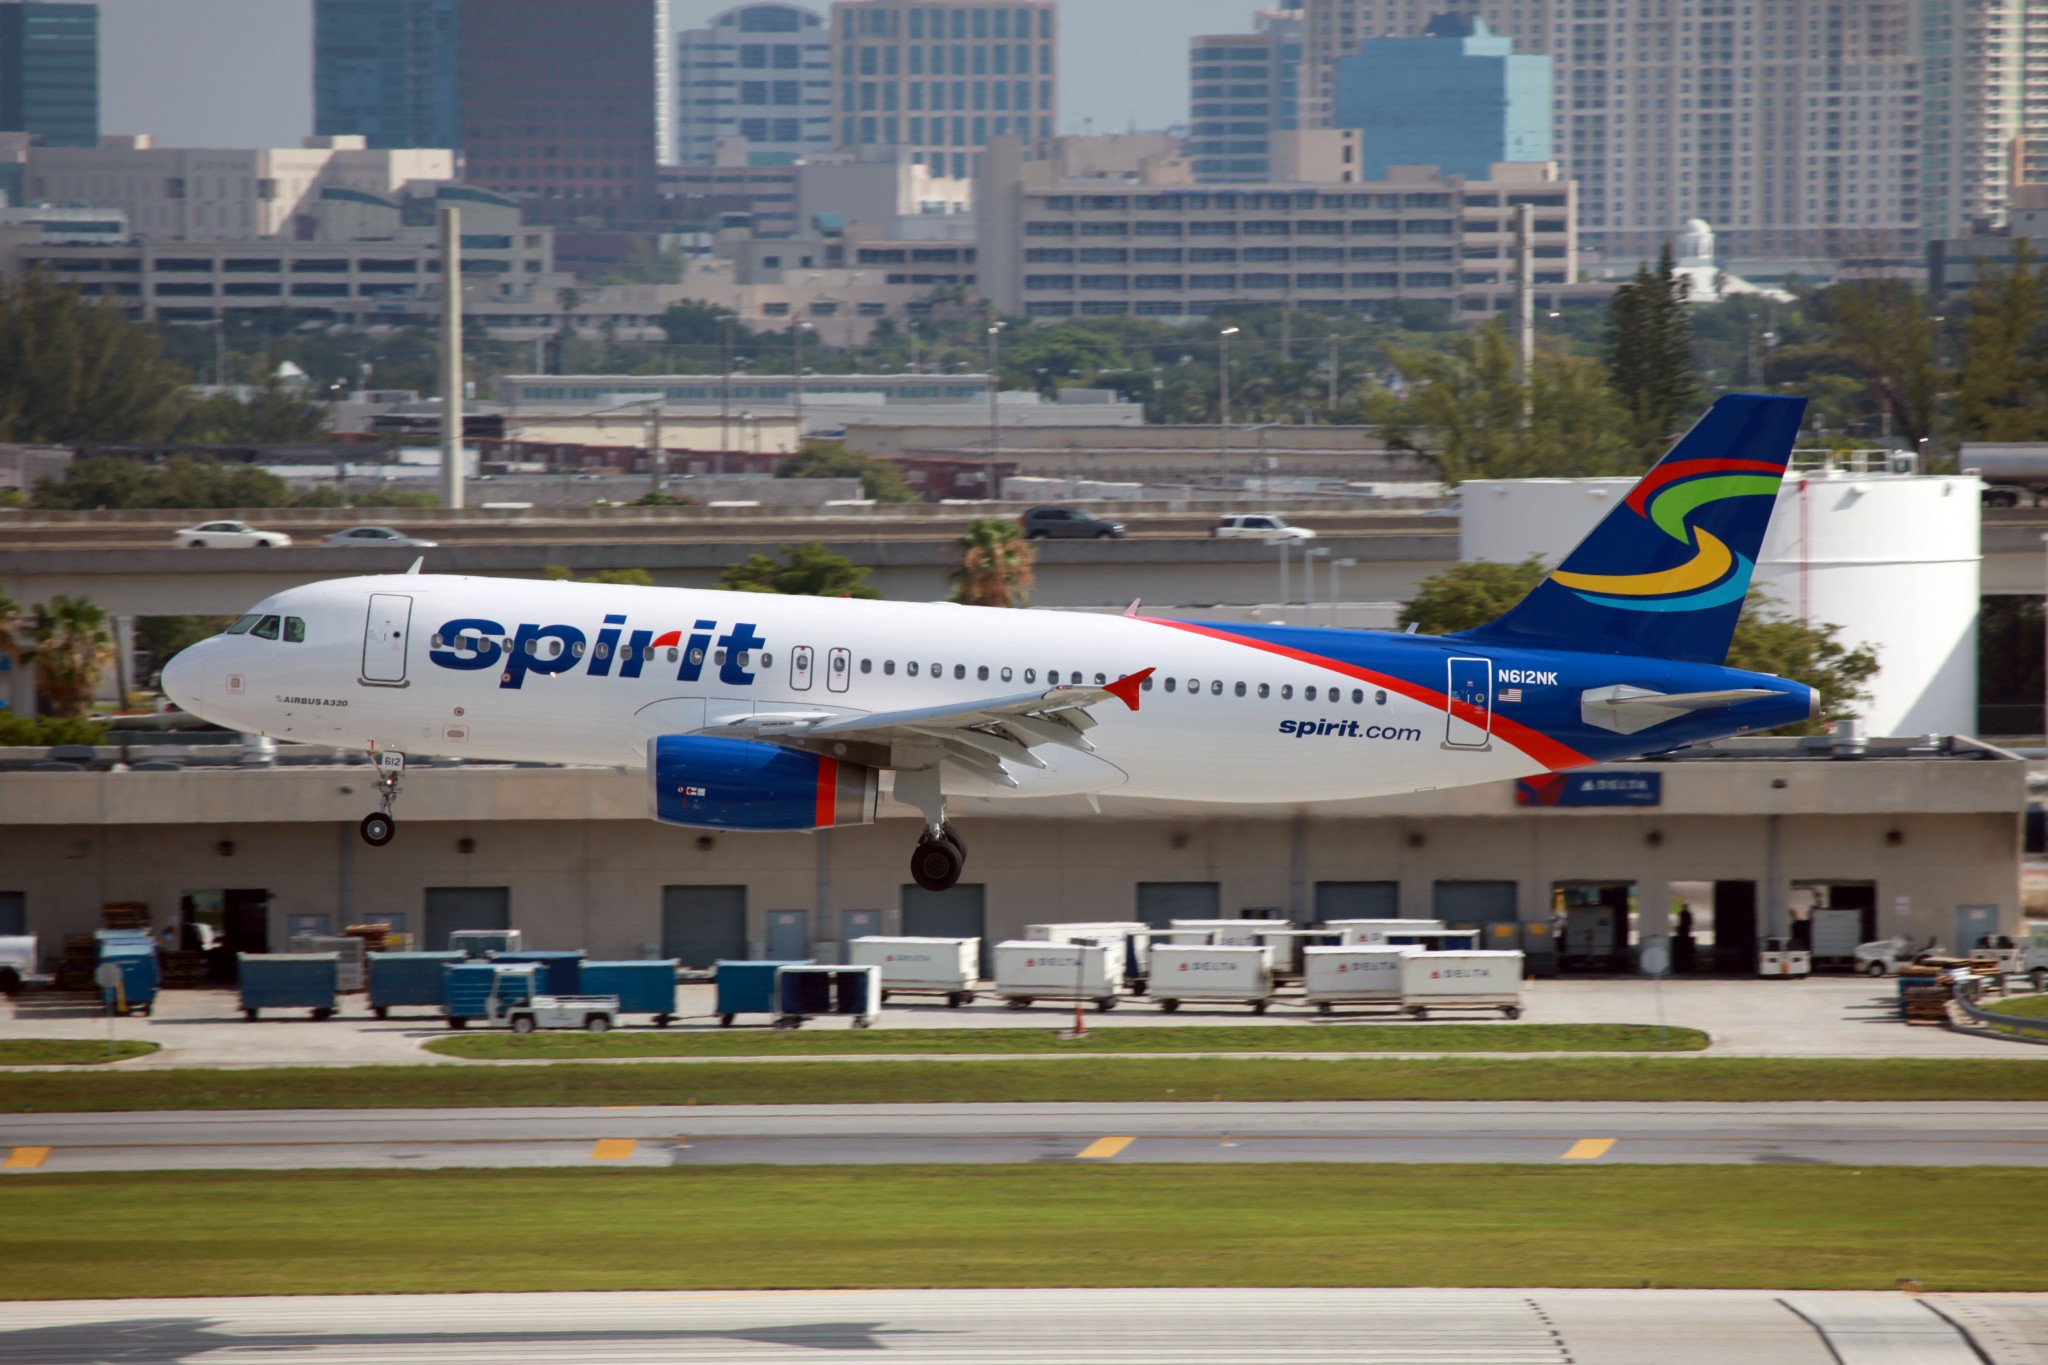 Spirit Airlines posts massive jump in earnings